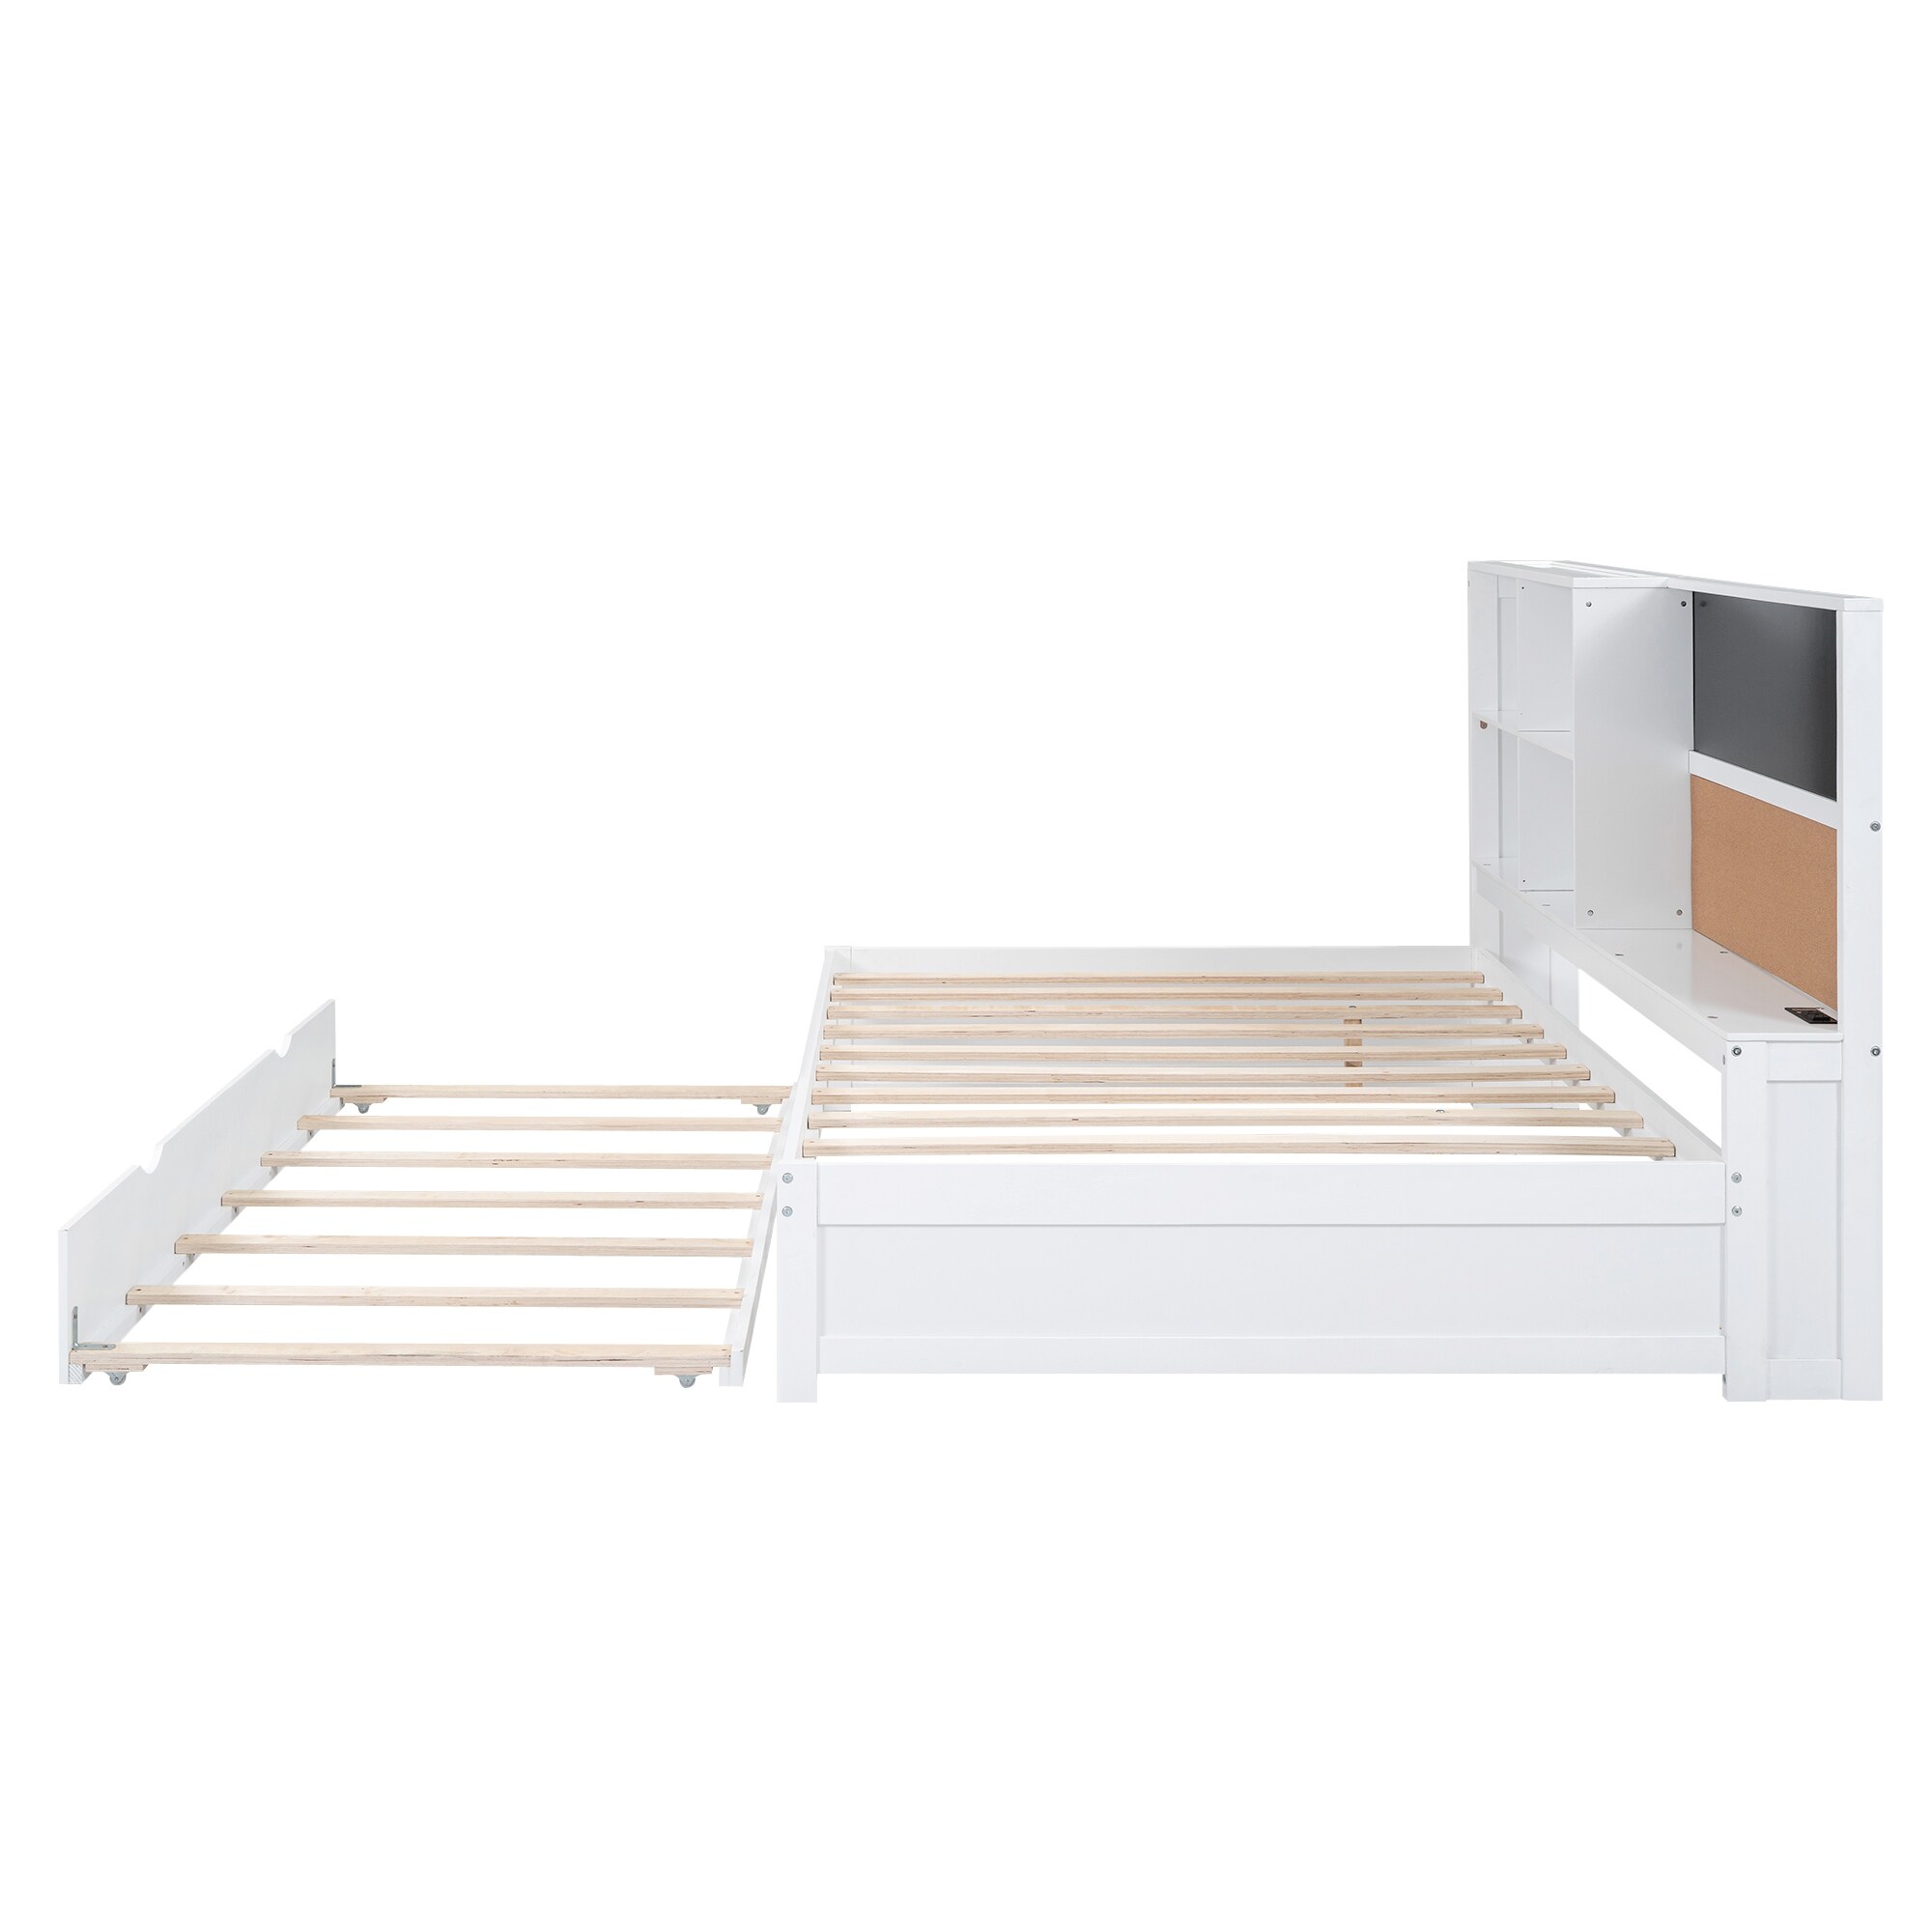 Full Wooden Daybed with Storage Shelves, Blackboard, Cork Board, USB Ports and Twin Trundle, White